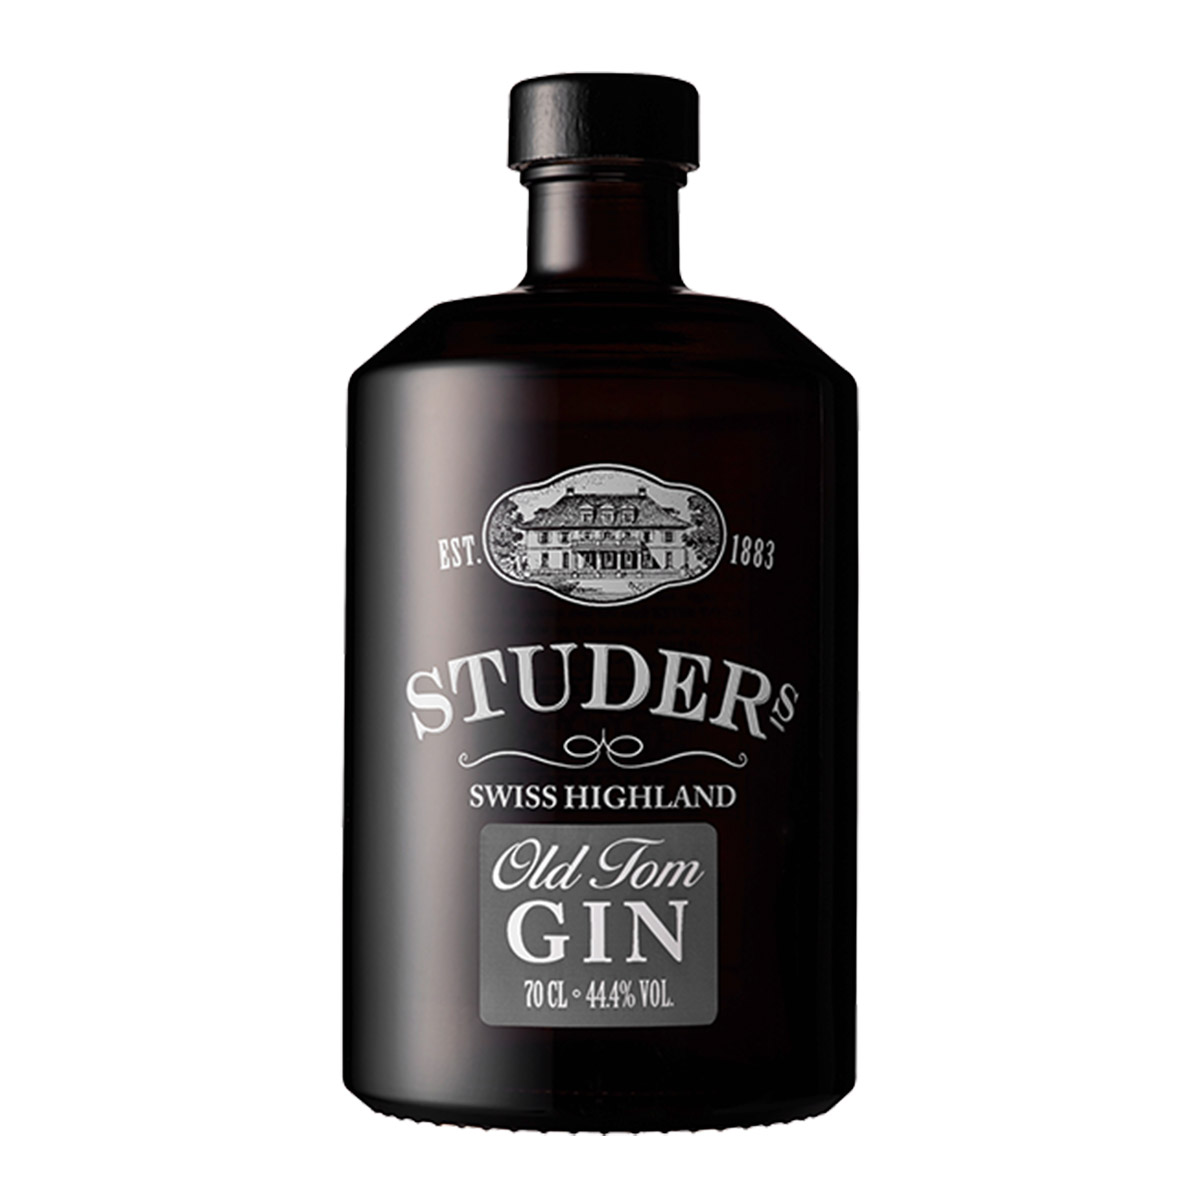 STUDERs Old Tom Gin